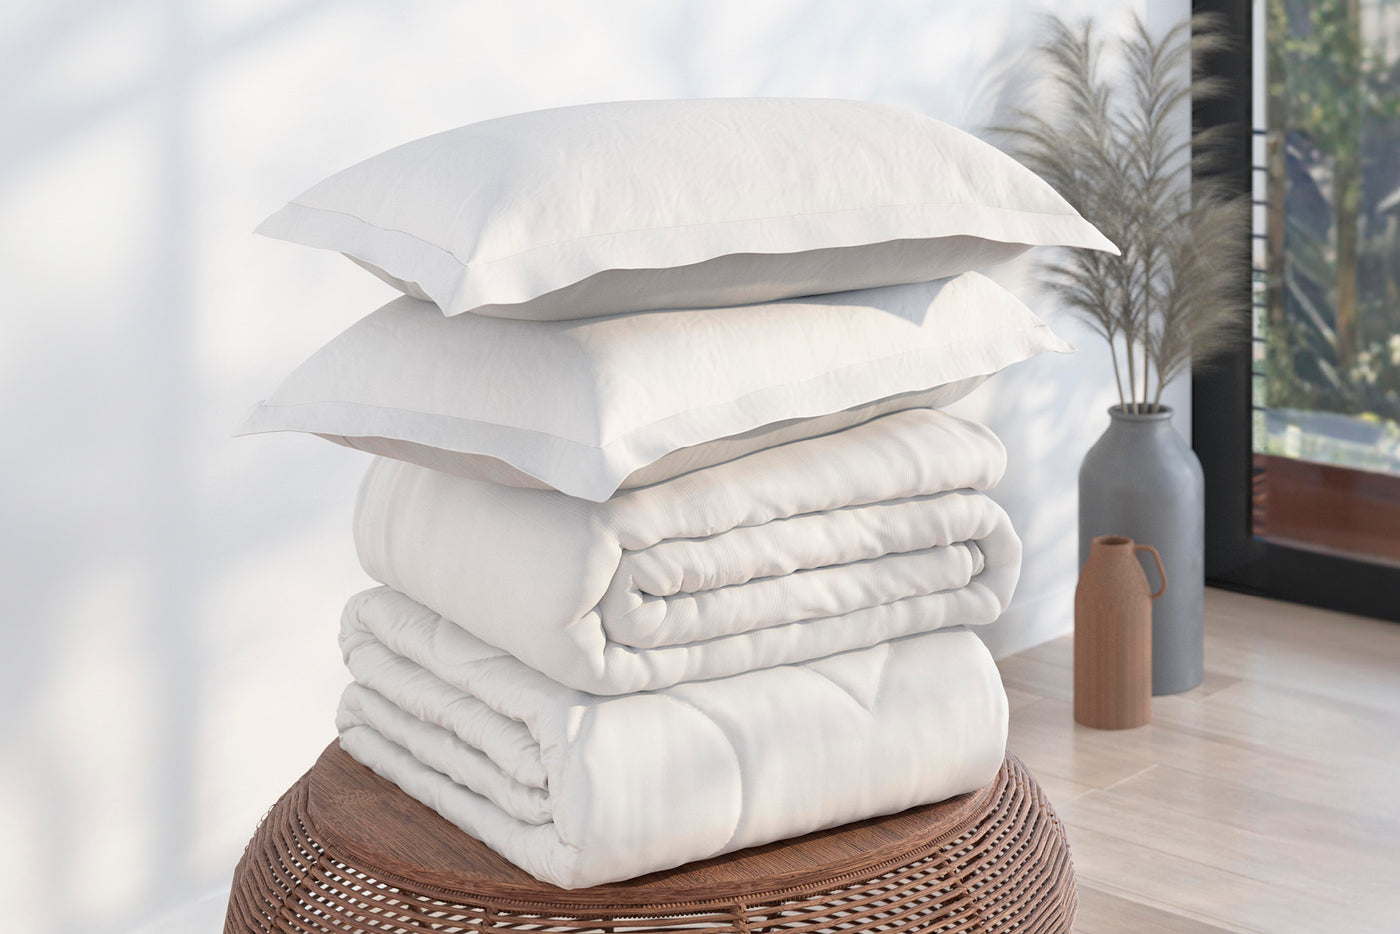 Image of a pile of bedding on top of a brown table. The bedding shown includes (from top to bottom): 2 White Pillow Shams, a neatly folded White Duvet Cover + Cooling, and a neatly folded Cooling Duvet Insert 